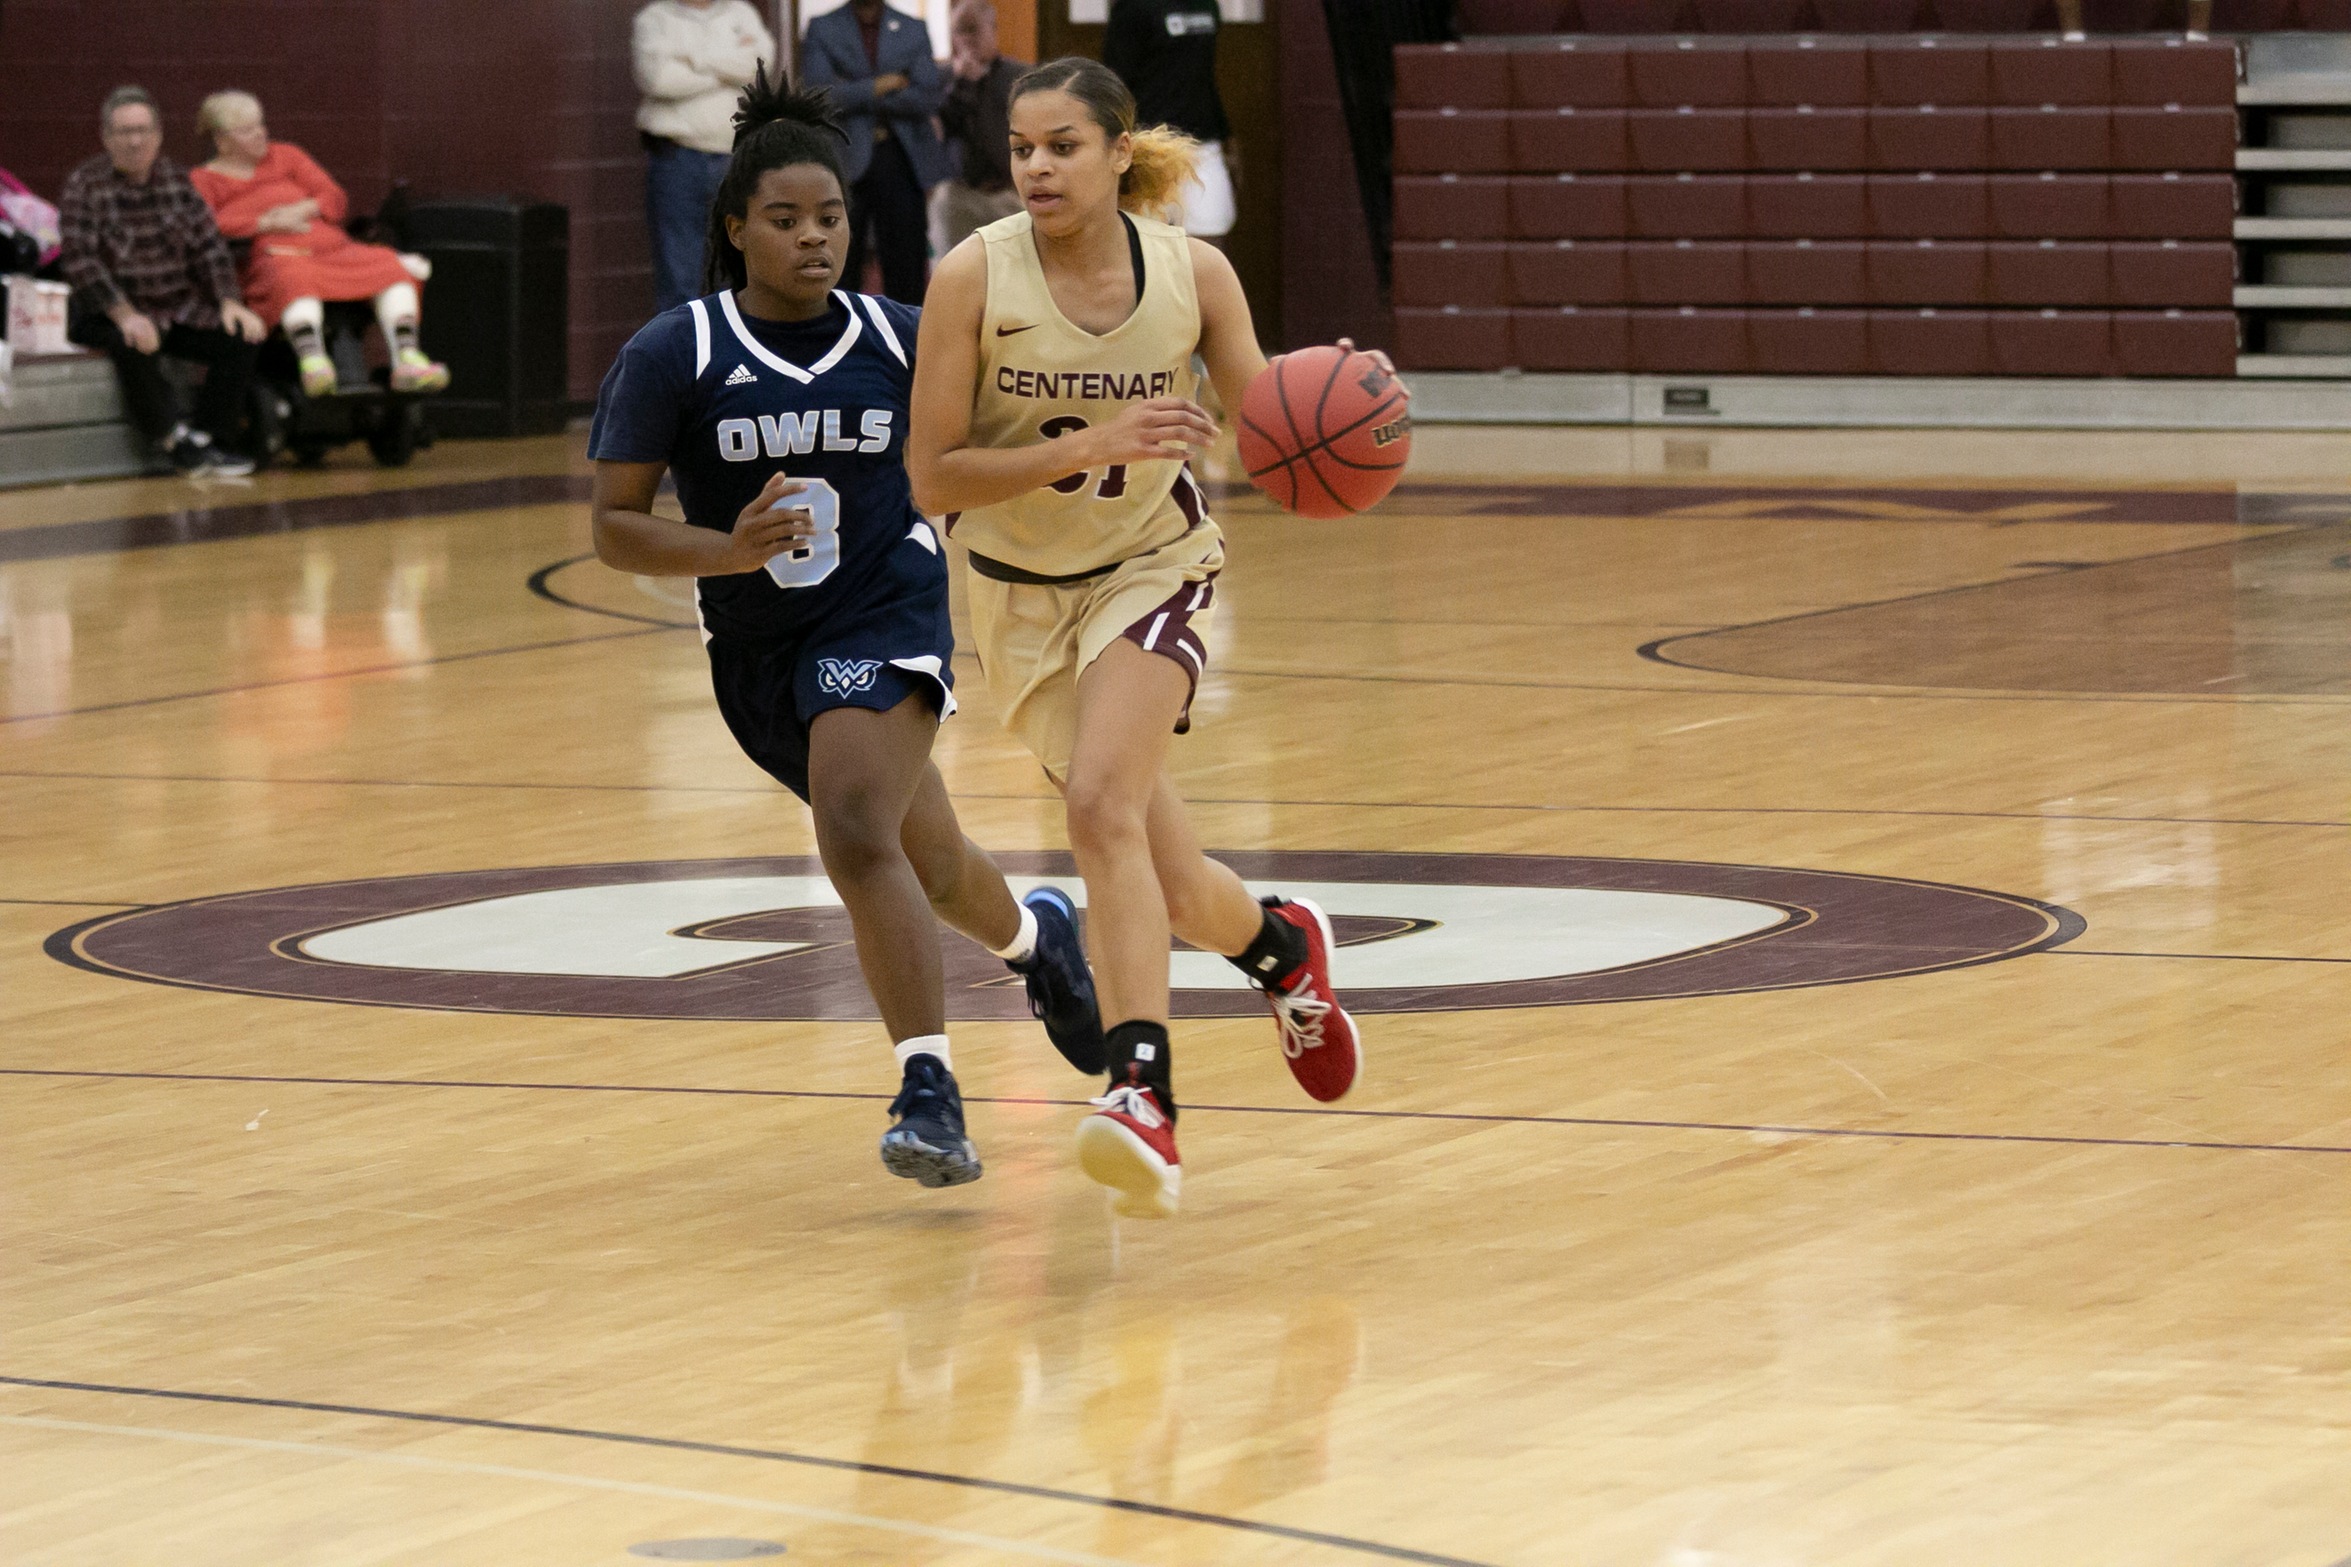 Ladies Fall To Hendrix At Home On Sunday, 58-52